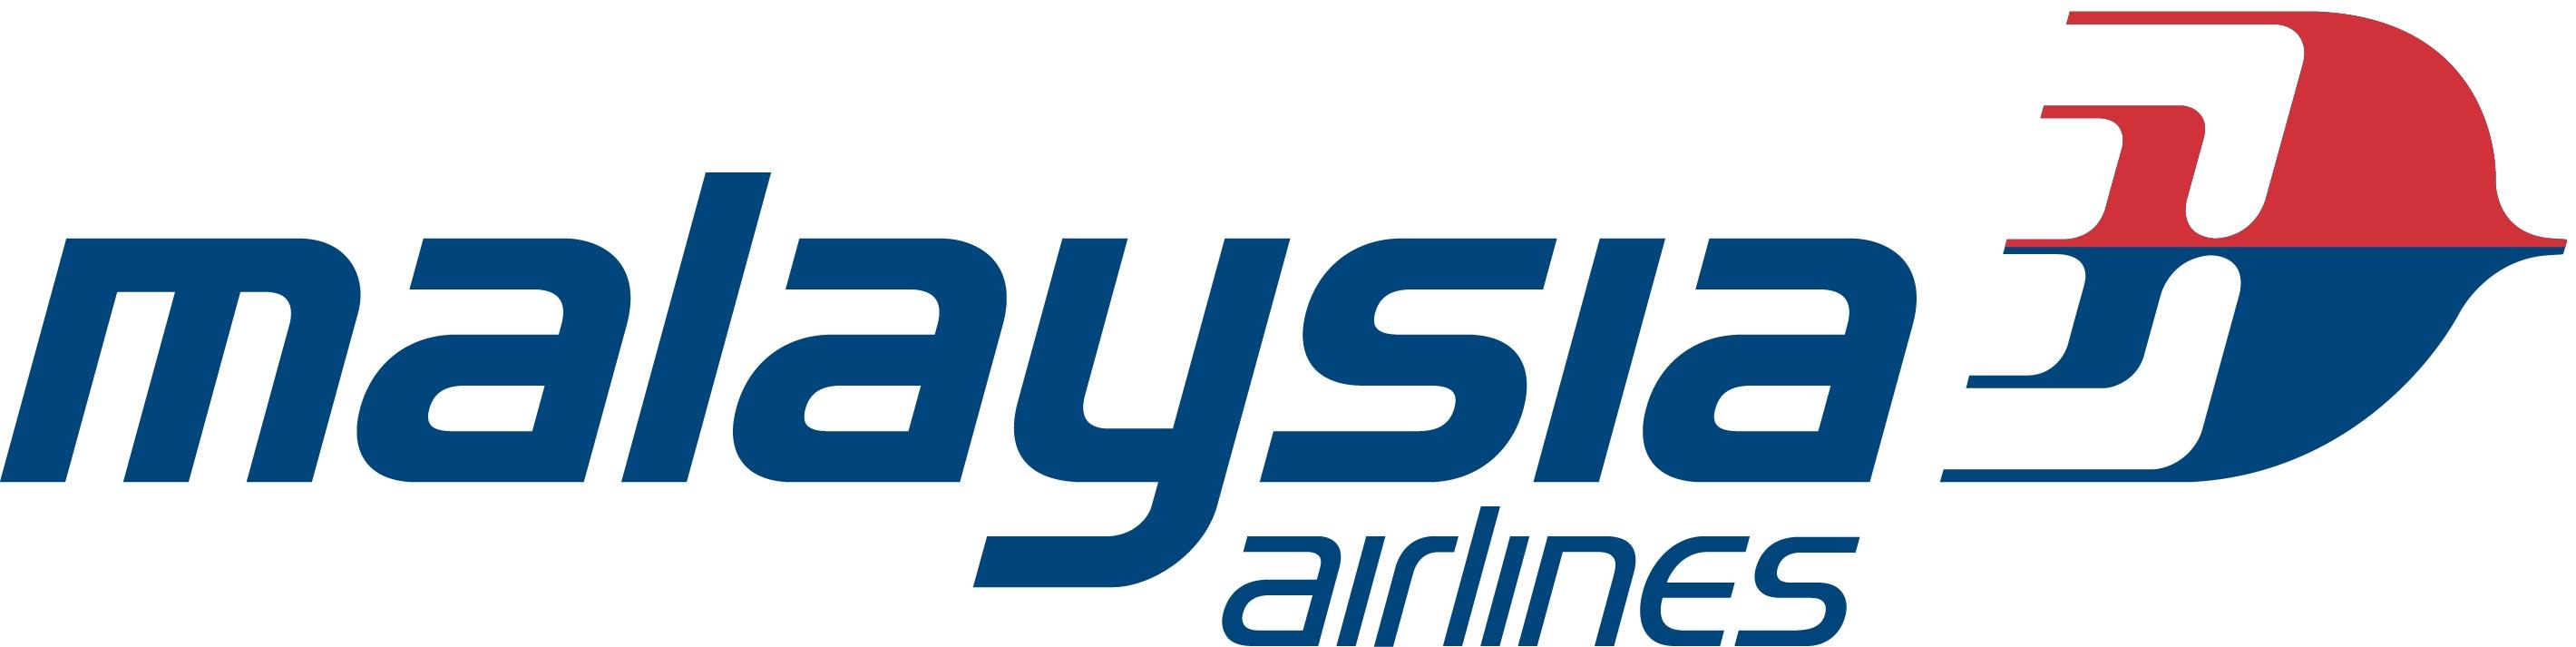 All Airline Logo - Malaysia Airlines Logo - Live and Let's Fly